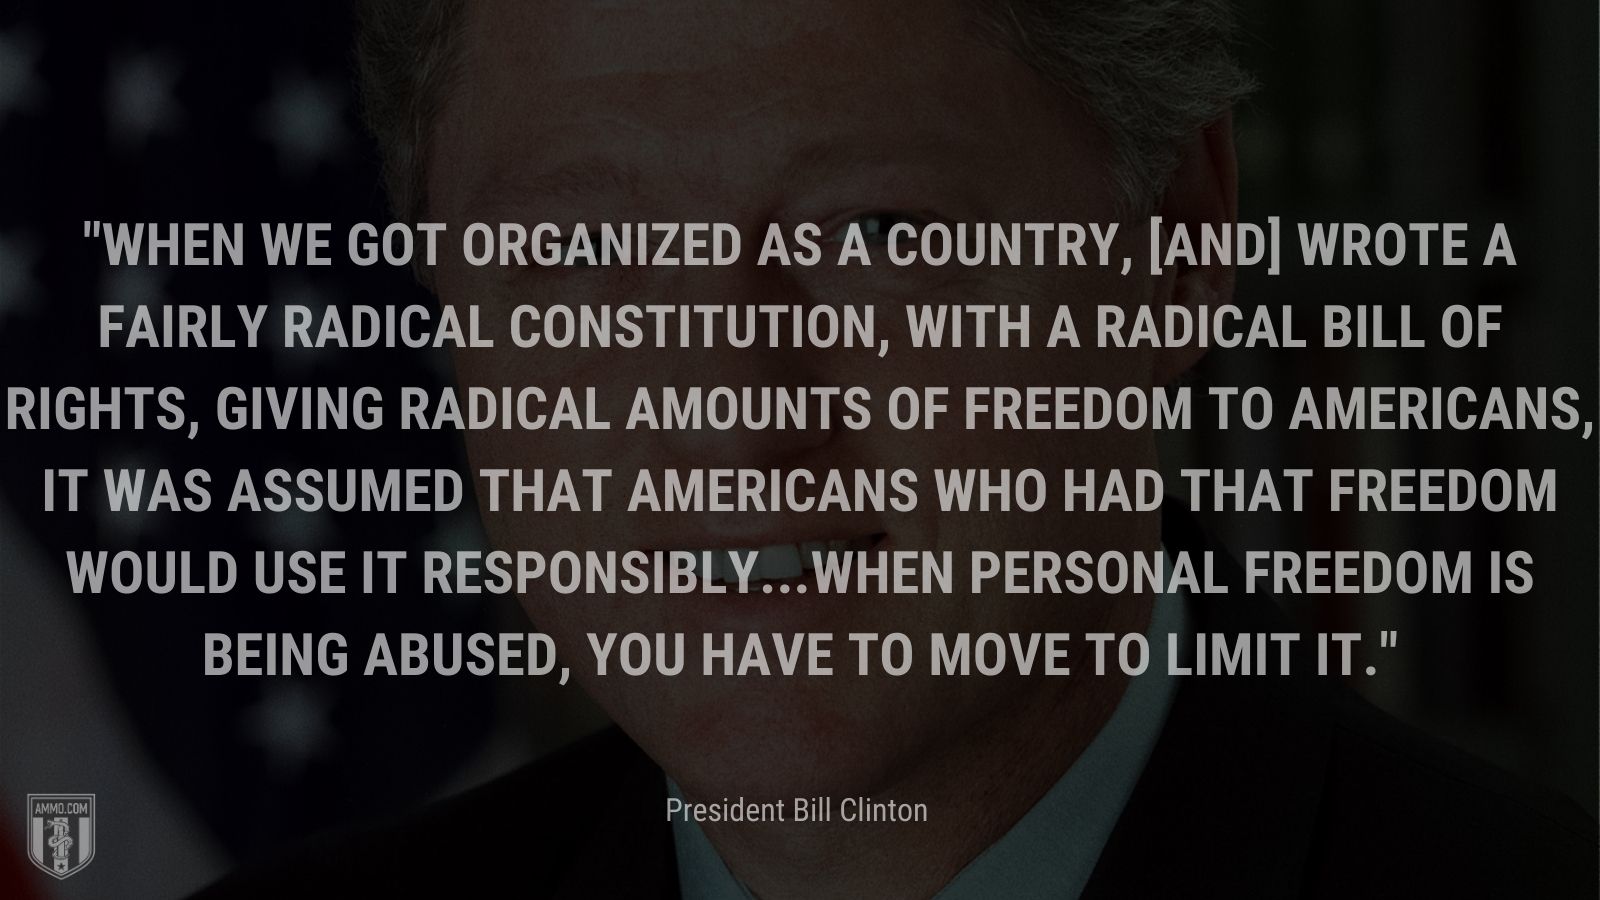 “When we got organized as a country, [and] wrote a fairly radical Constitution, with a radical Bill of Rights, giving radical amounts of freedom to Americans, it was assumed that Americans who had that freedom would use it responsibly...When personal freedom is being abused, you have to move to limit it.” -Bill Clinton